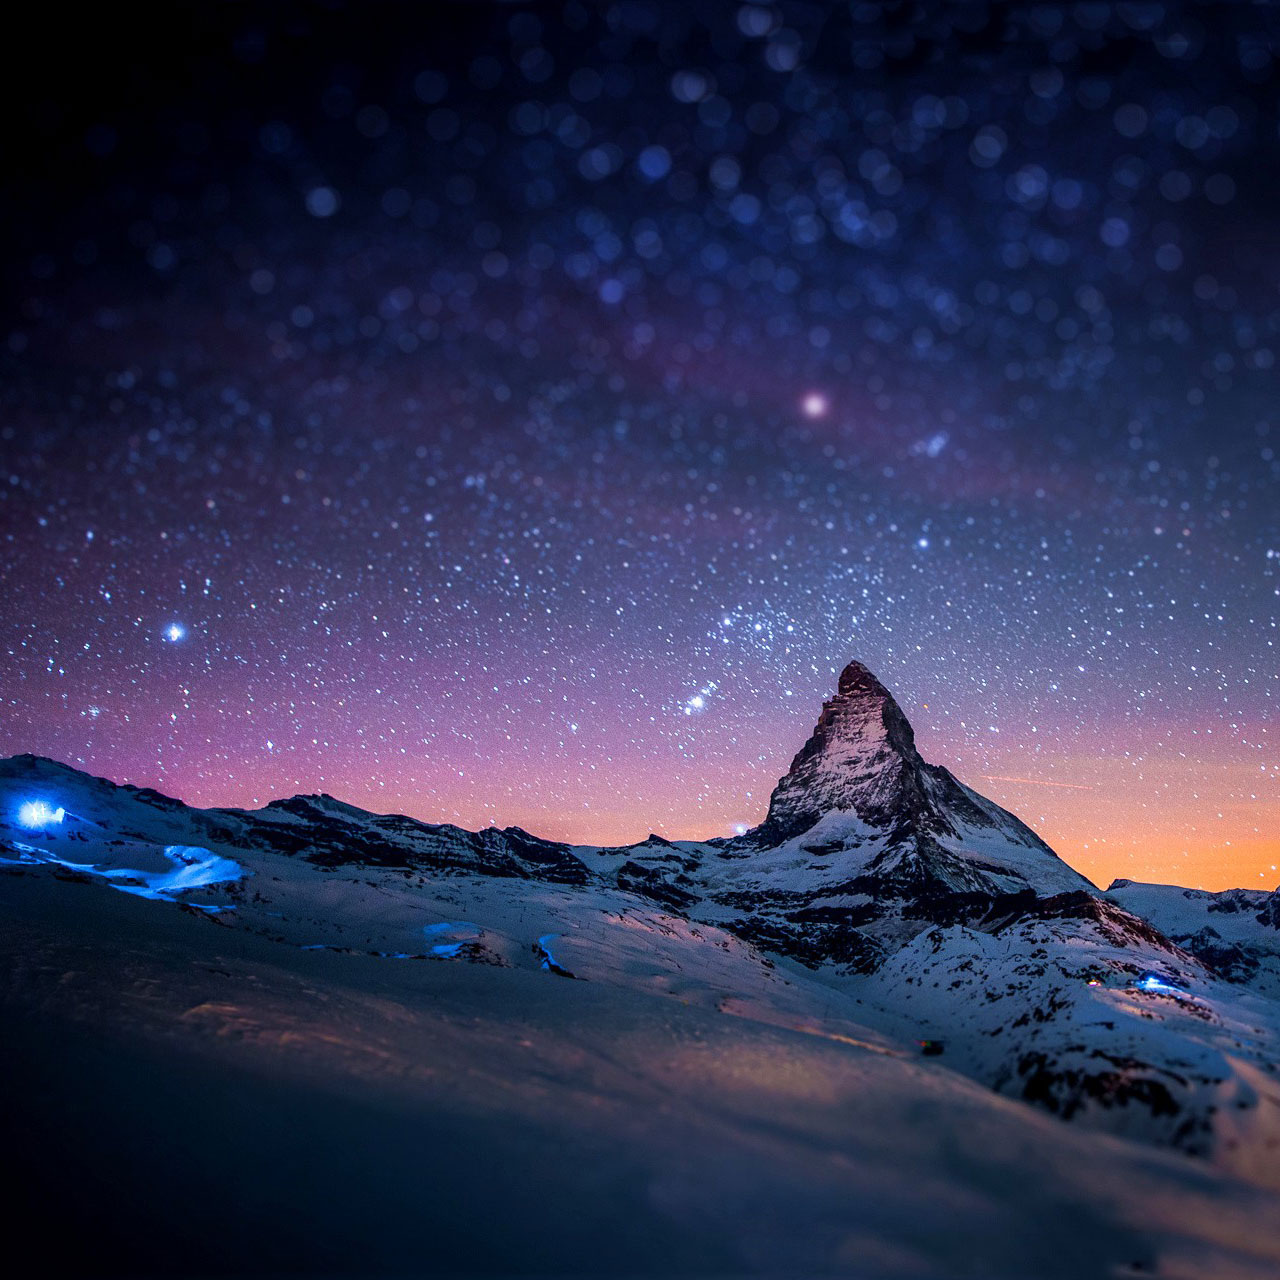 Samsung Galaxy Tab 101 Stars and snow night in the Alps wallpapers 1280x1280